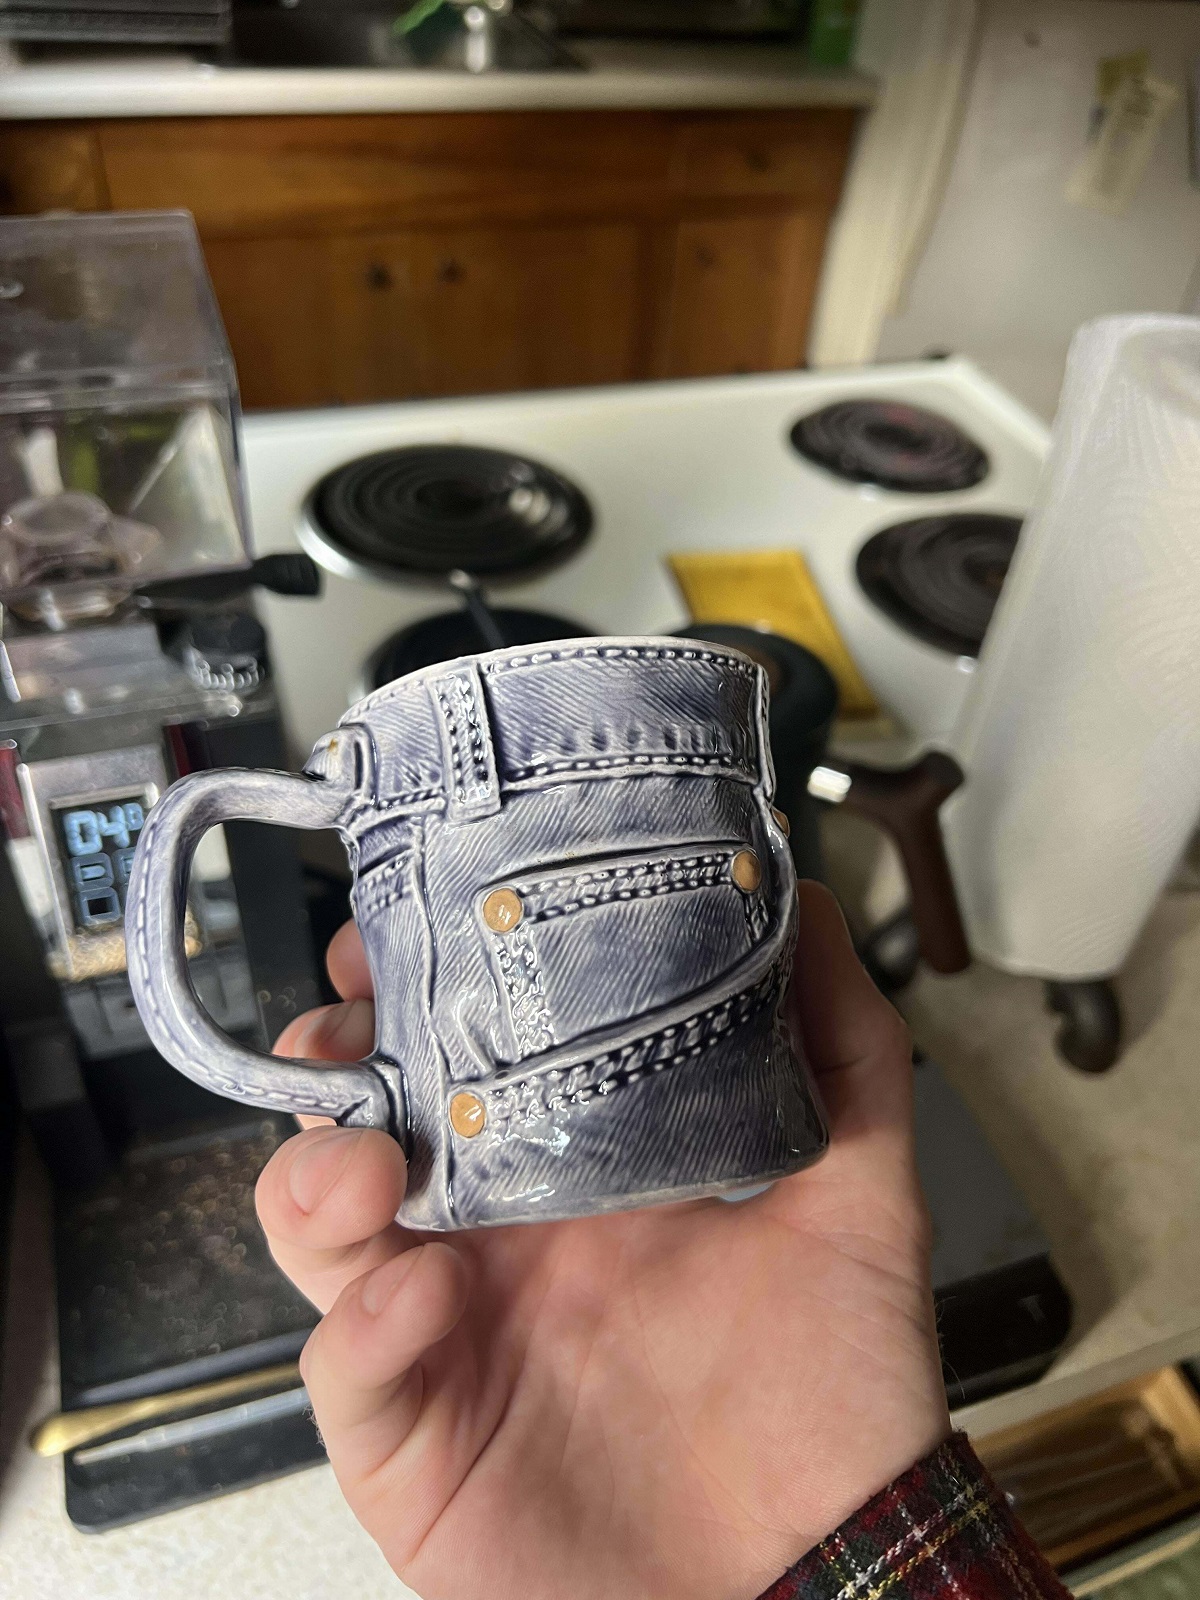 As A Denim Enthusiast, This Thrift Find May Be My New Favorite Mug. (Or Should I Say… Jug?)